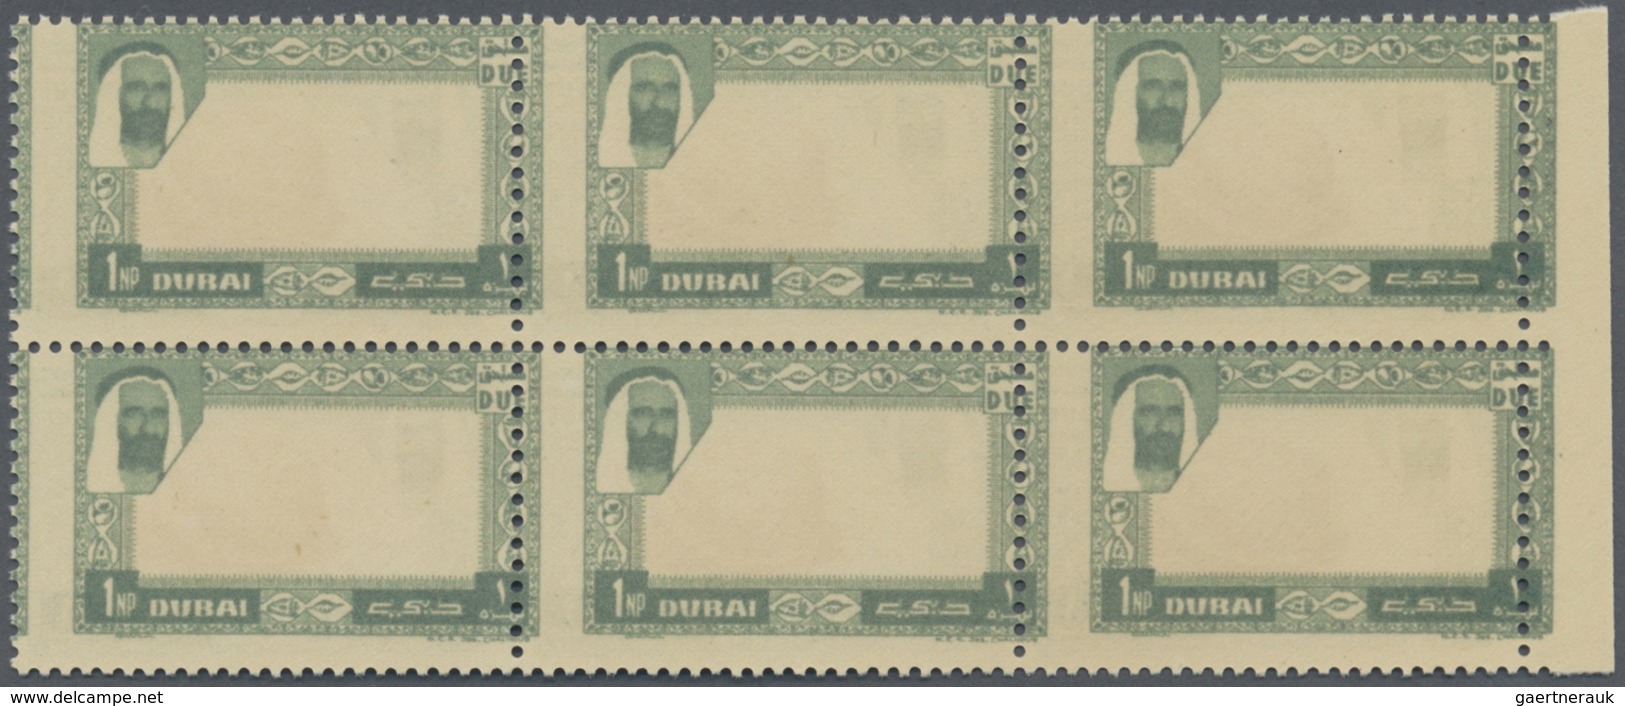 ** Dubai - Portomarken: 1963, Common Cockle 1np. With 2nd Printing Of Green-grey Frame On Gum Side In A - Dubai